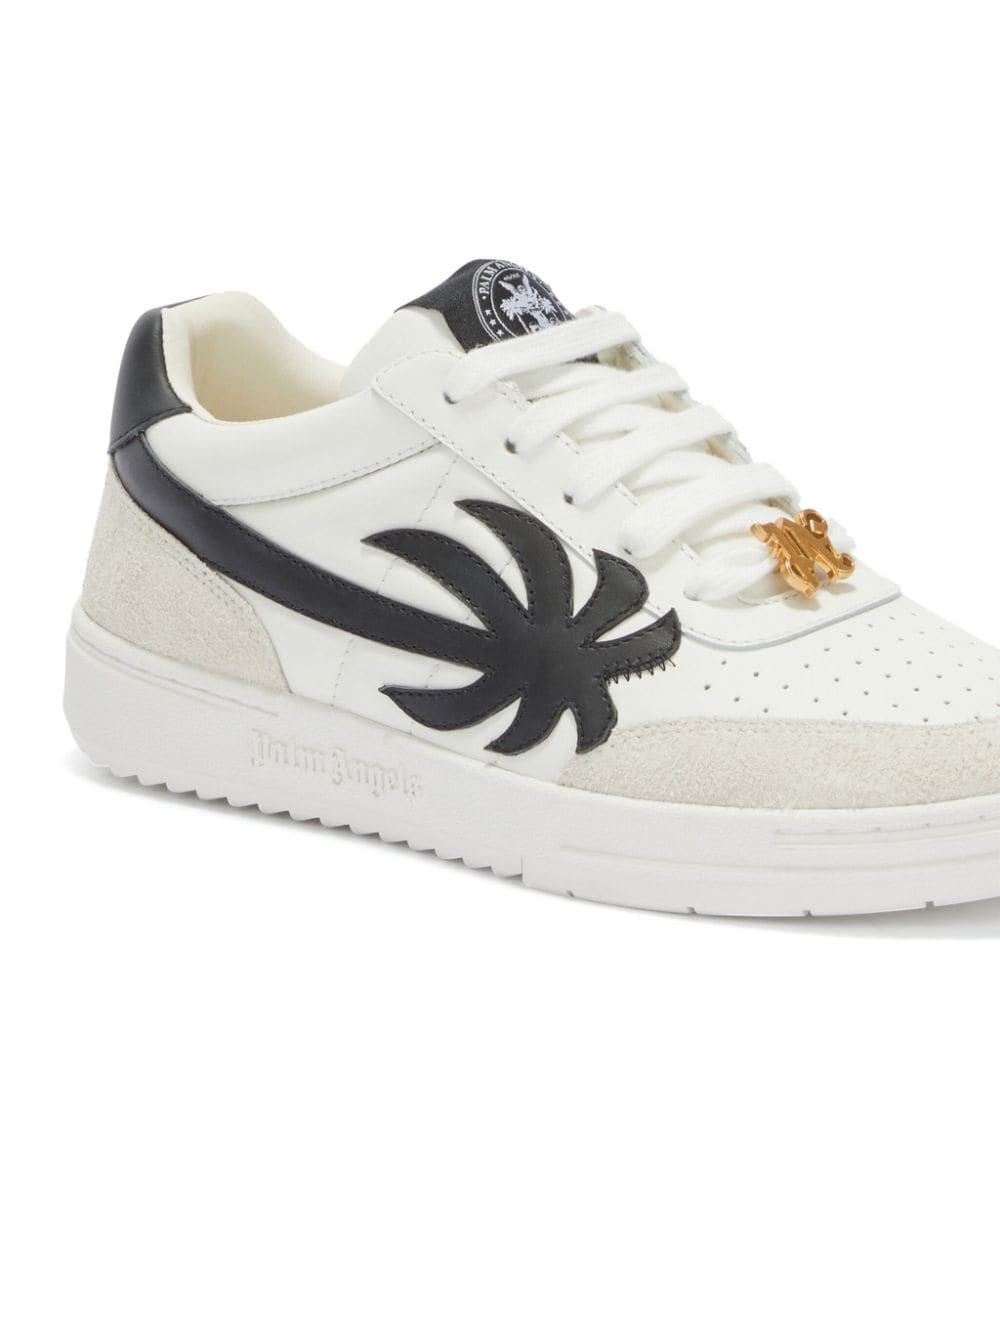 Palm Beach University sneakers<BR/><BR/><BR/>